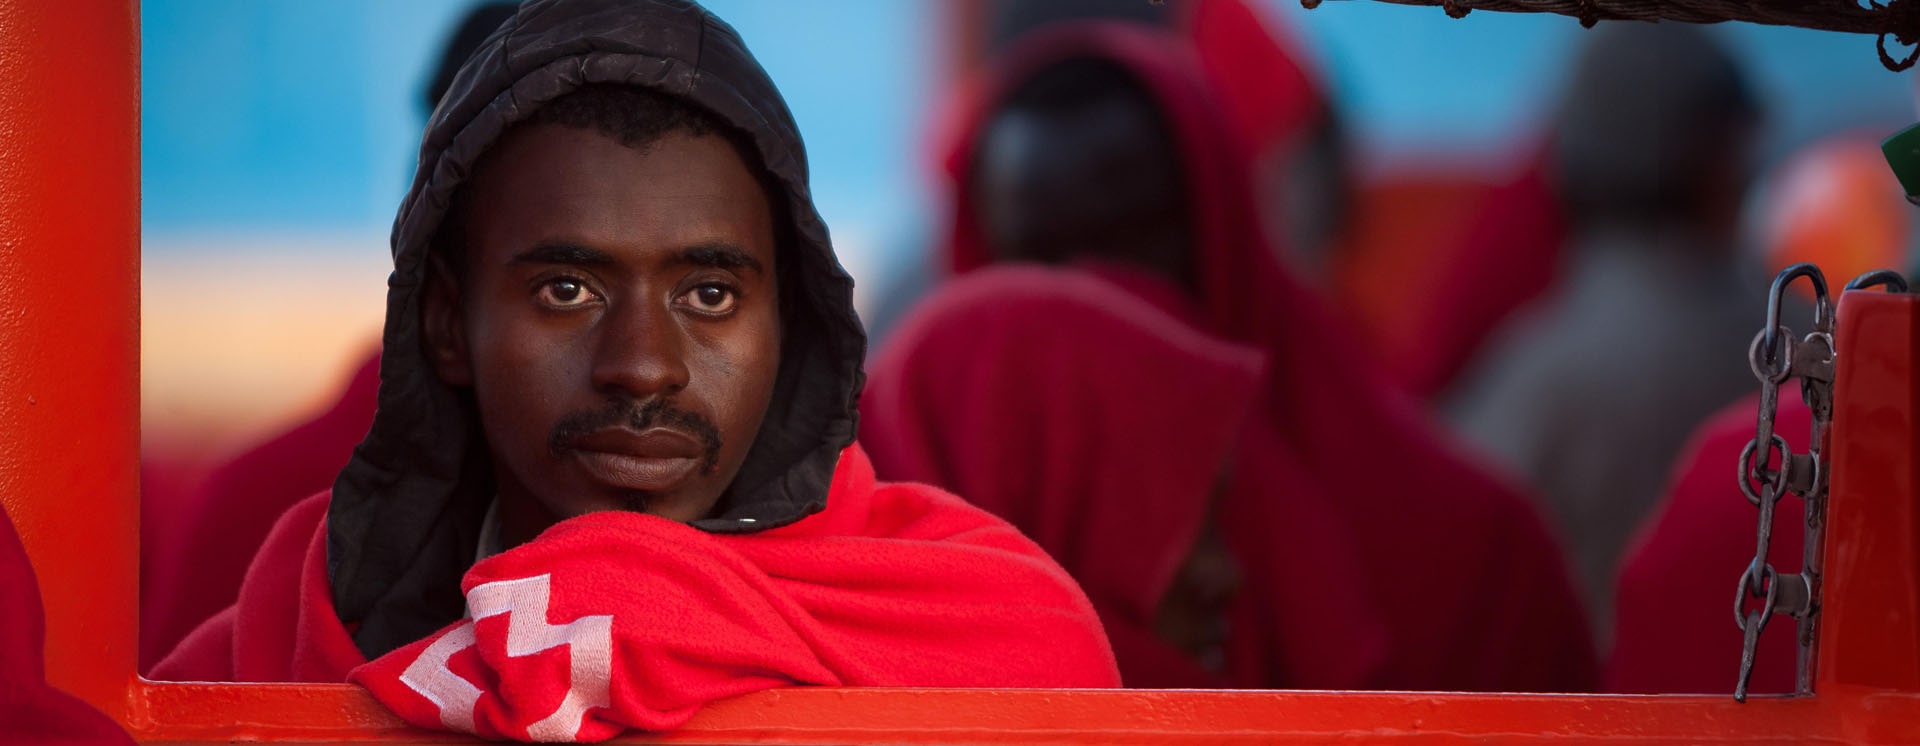 An African migrant wrapped in an orange blanket staring out into the middle distance